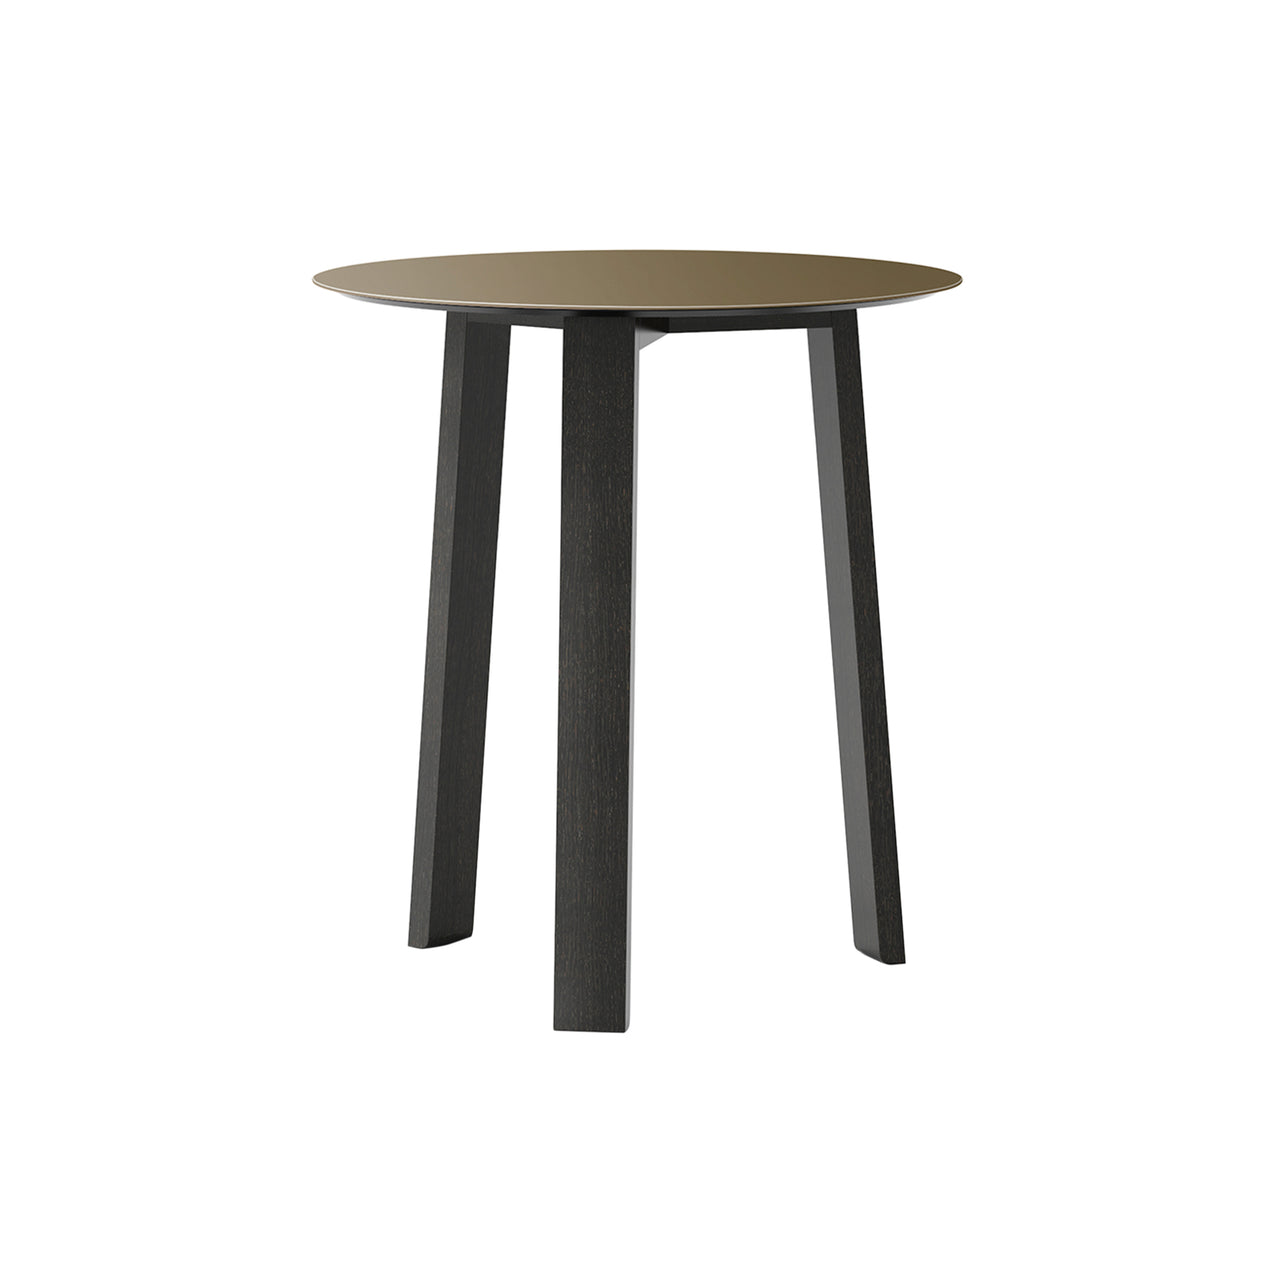 Stockholm Round Side Table: High + Bronze Anodised Aluminum + Dark Grey Stained Oak